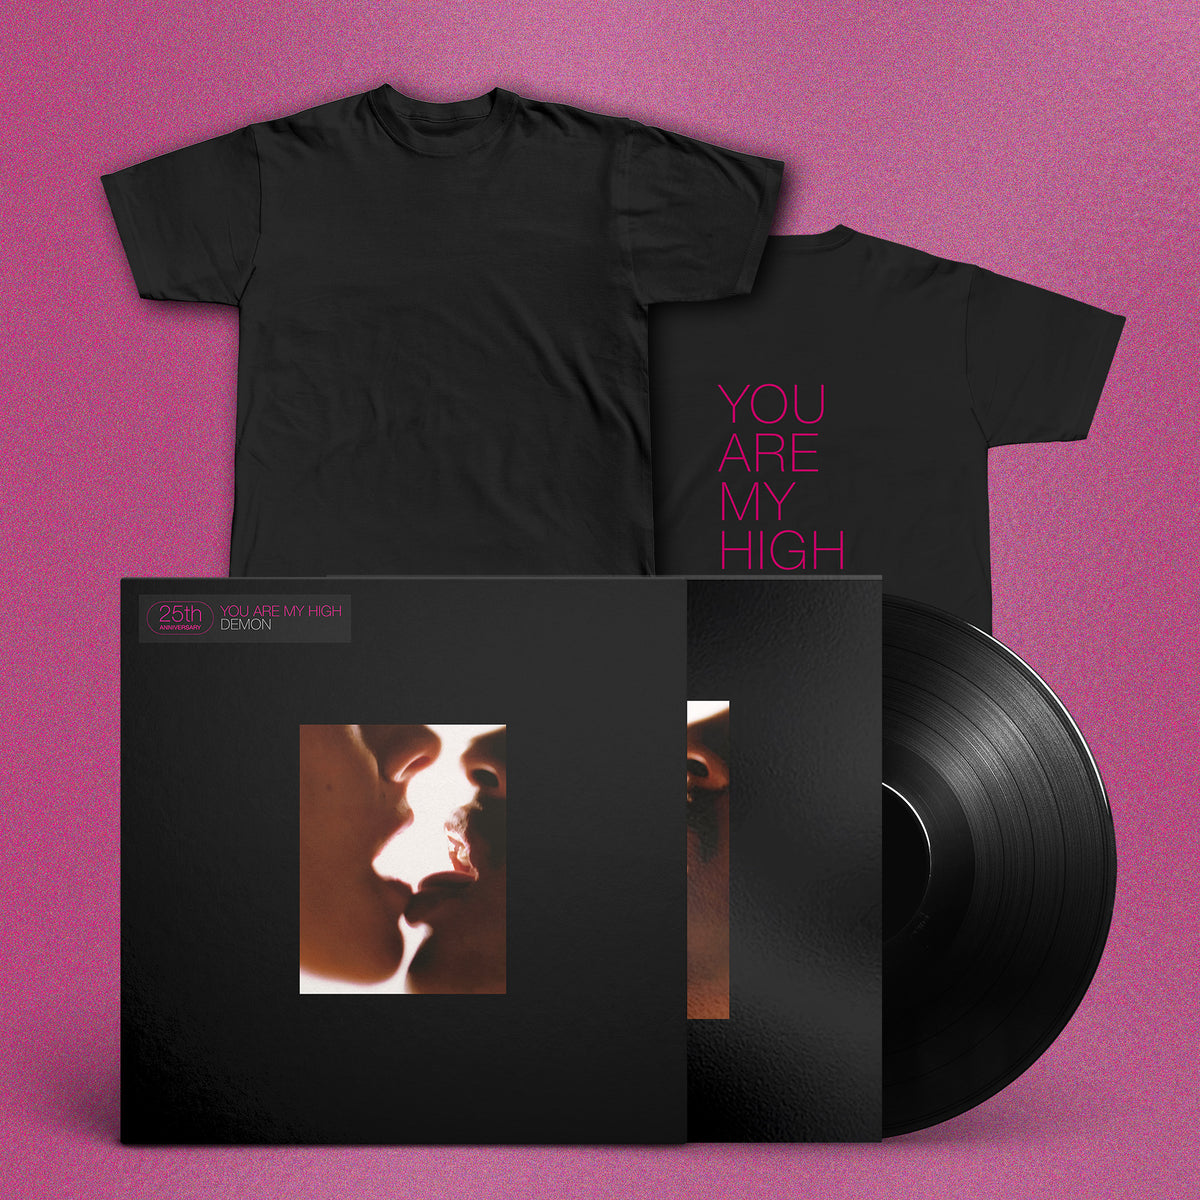 Pack 'You Are My High' Anniversary - Vinyle Noir + T-Shirt "You"